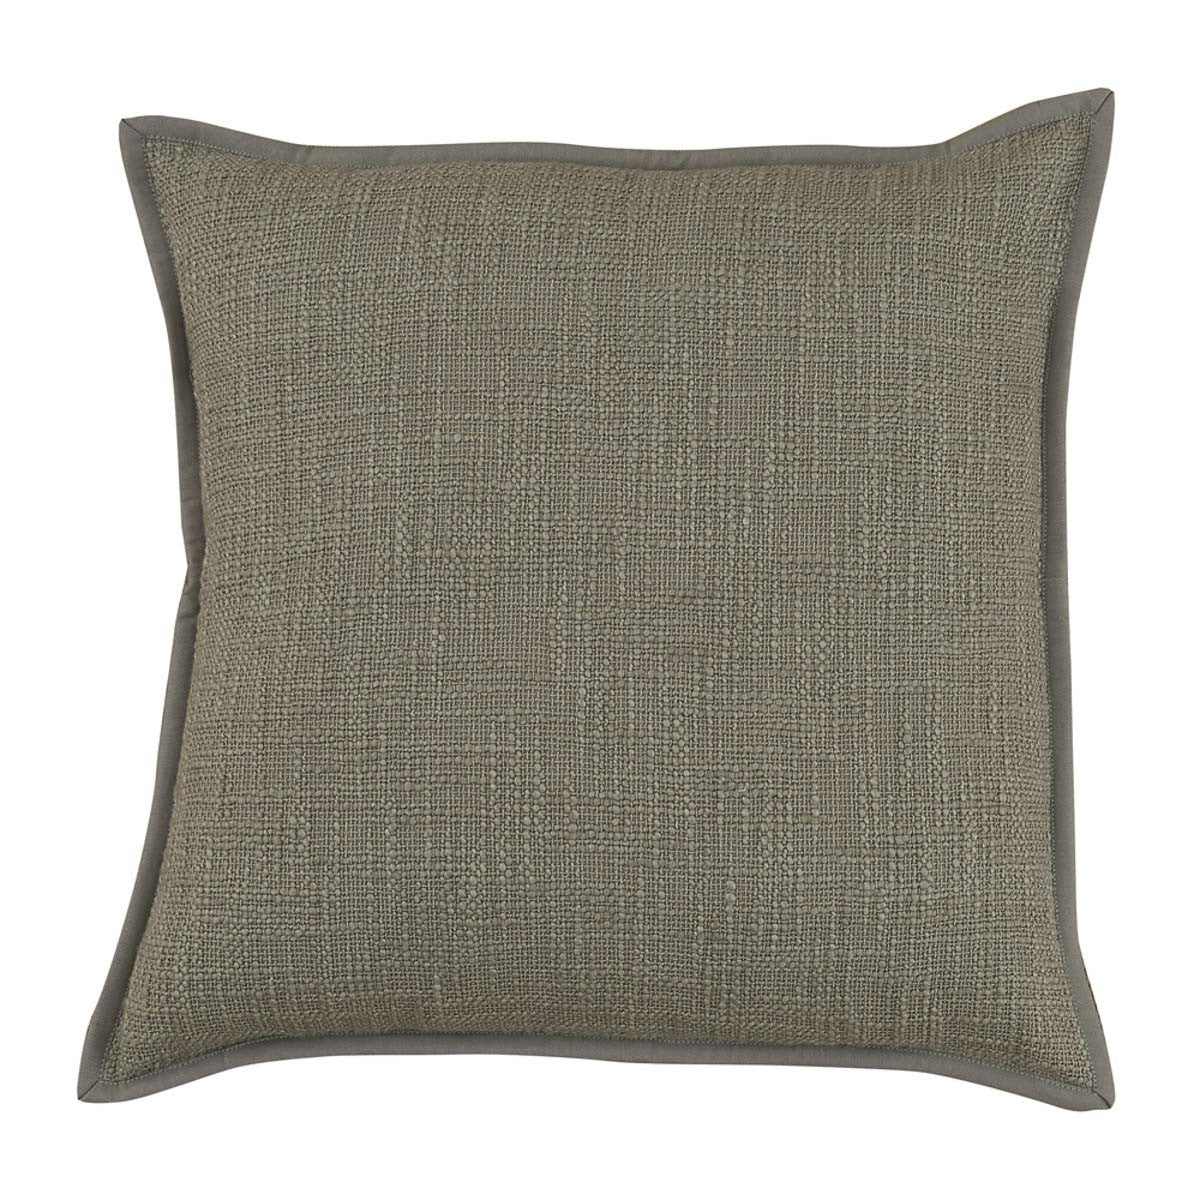 MARGO PILLOW COVER - STERLING Set Of 4 Park Designs